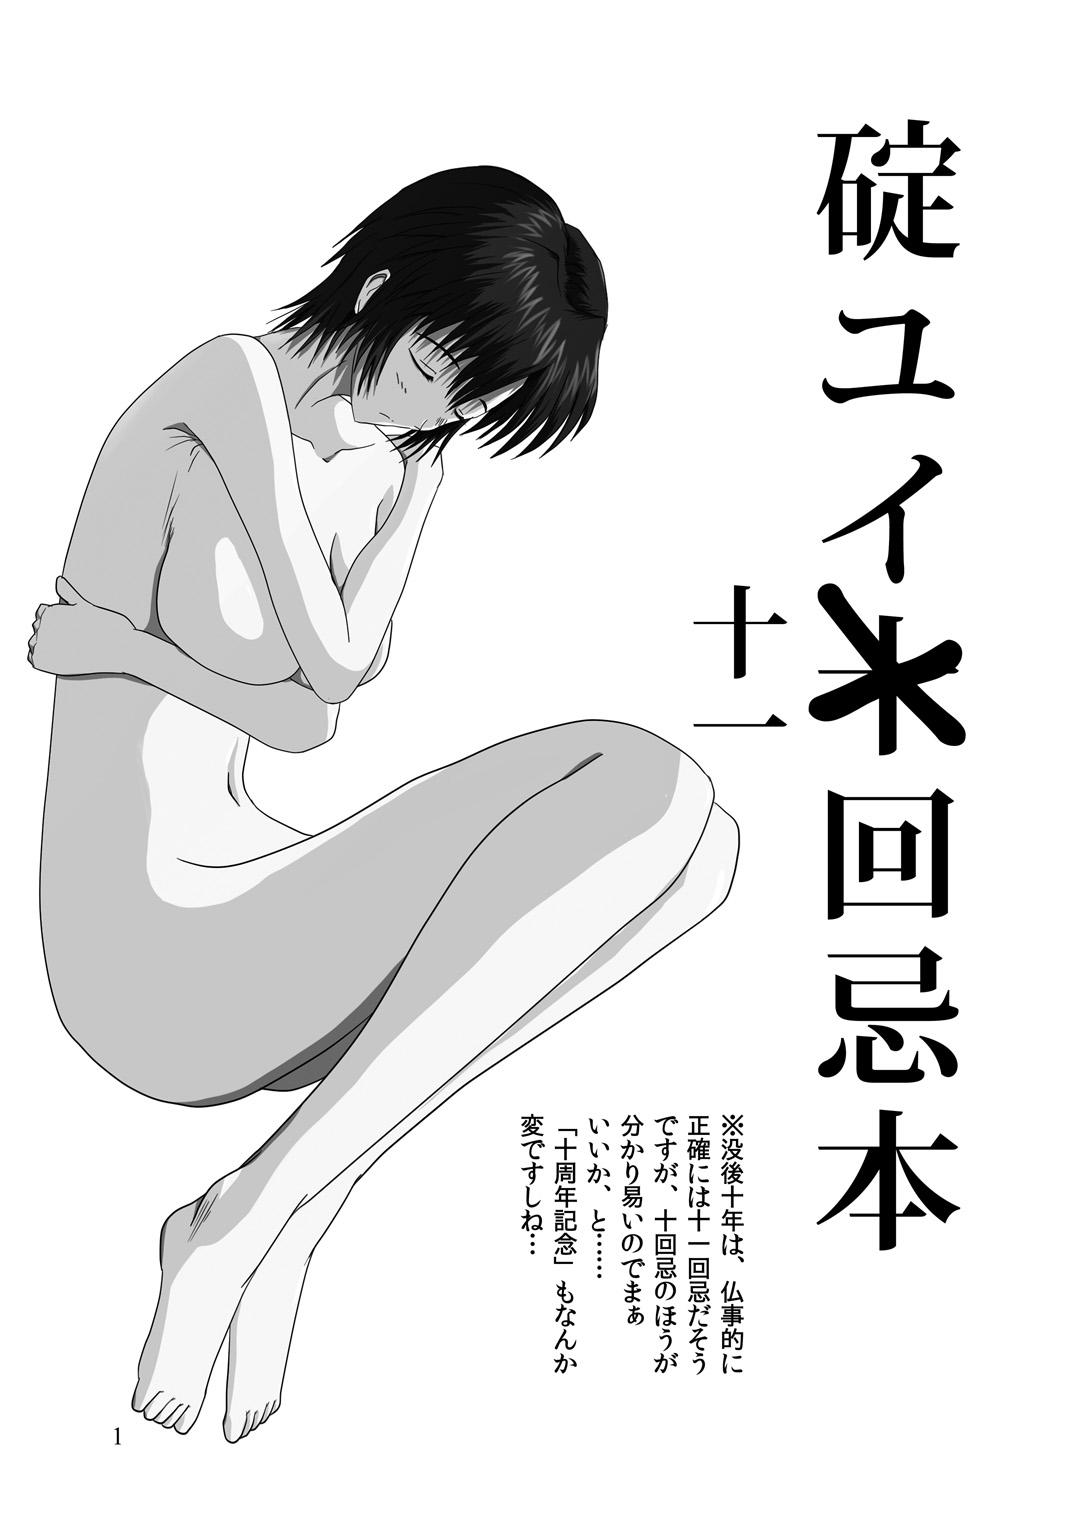 Best Blowjobs Yui Ikari 10th Anniversary Book - beyond the time - Neon genesis evangelion Point Of View - Picture 2